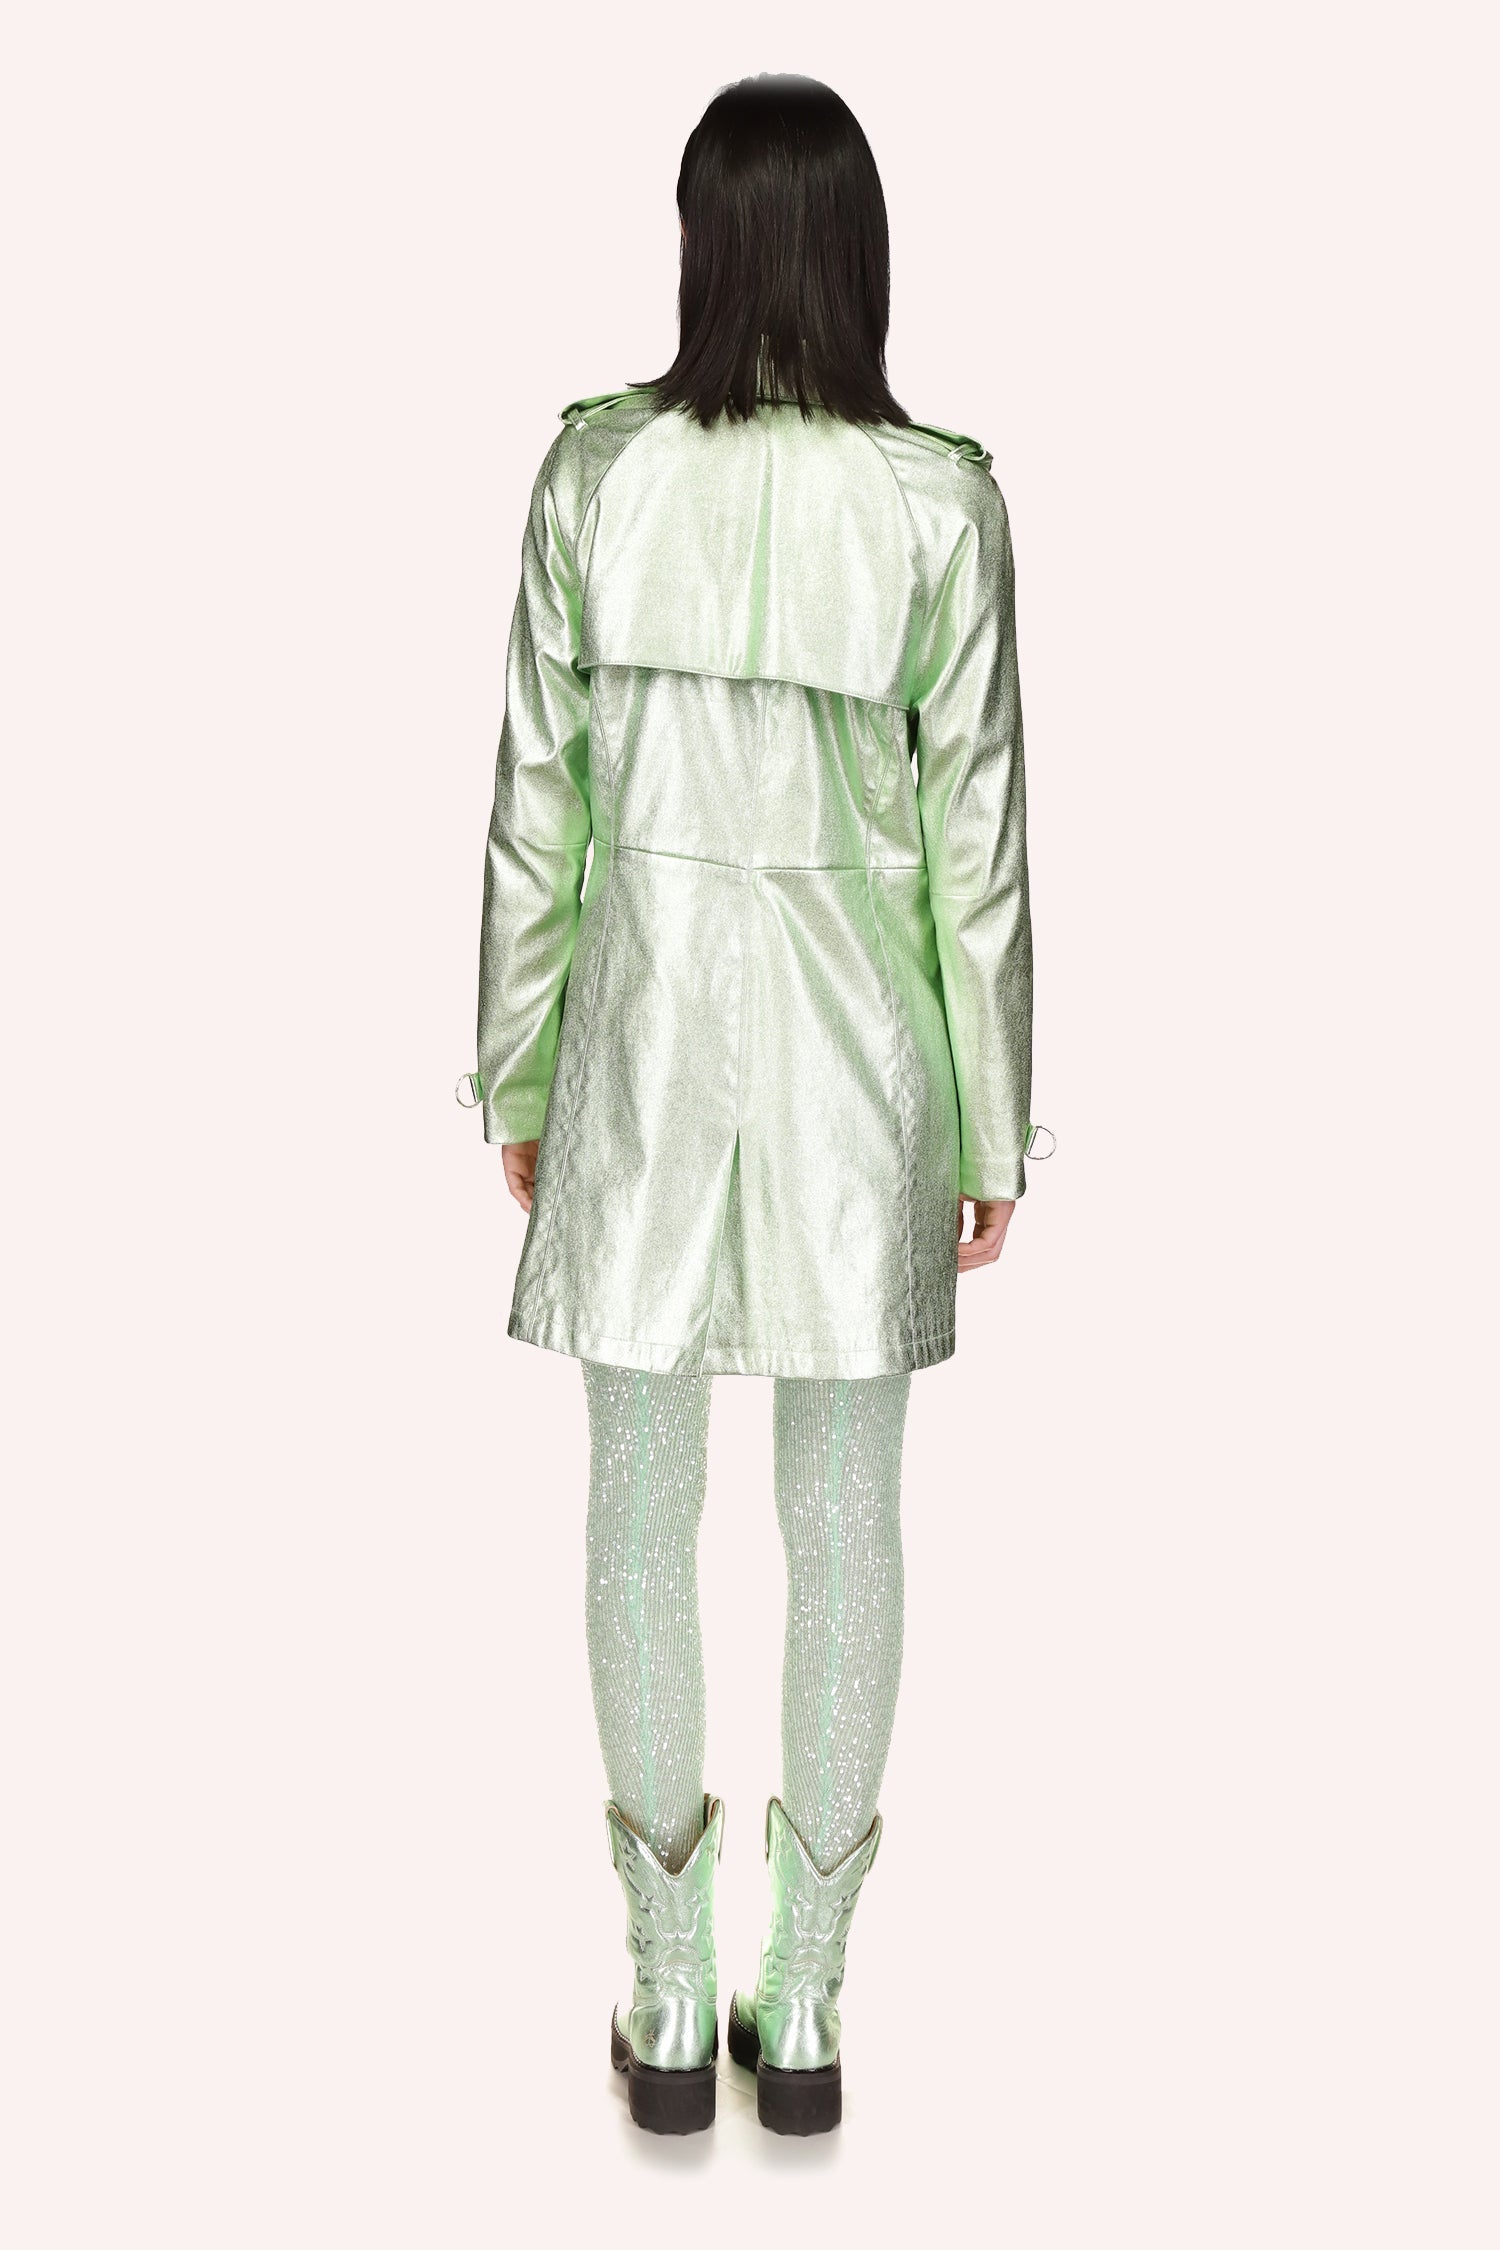 Peppermint Trench Coat, mid-length, large collar, long sleeves with buckle cuffs, epaulets, large overgarment on back